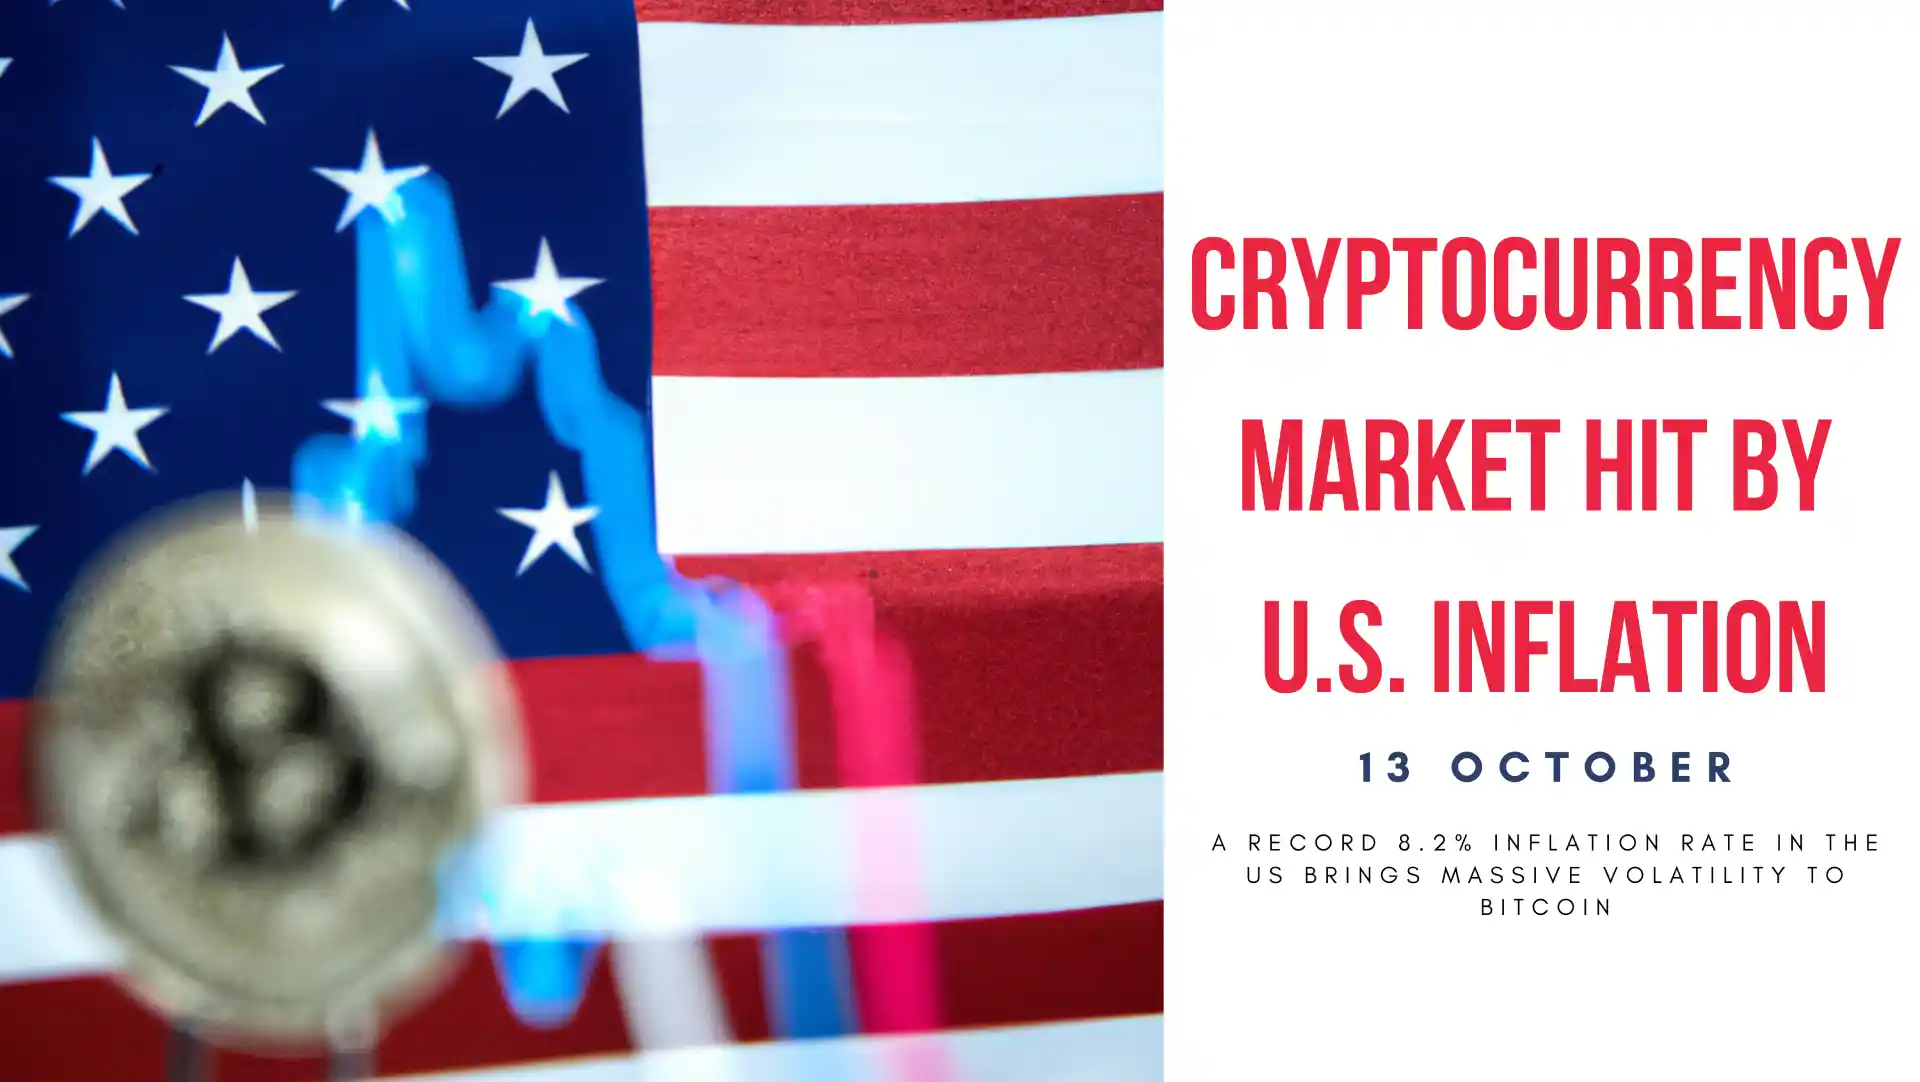 Cryptocurrency market hit by US inflation! Cardano leads crypto fall ahead of US inflation data 